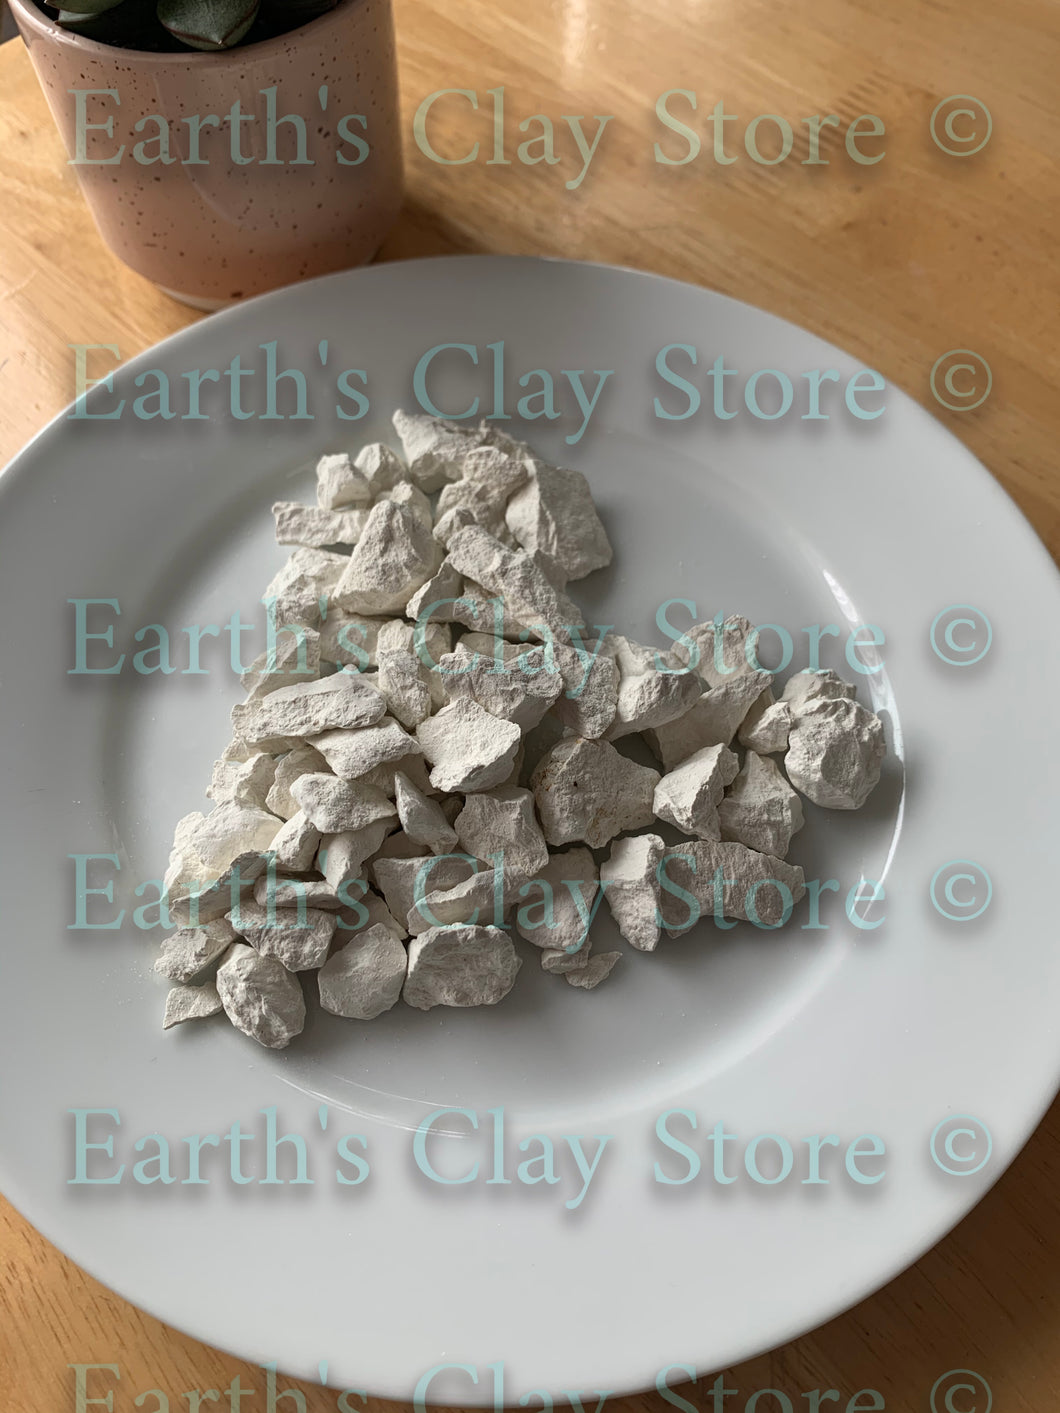 Chalk Powder/Calcium Carbonate – Earth's Clay Store